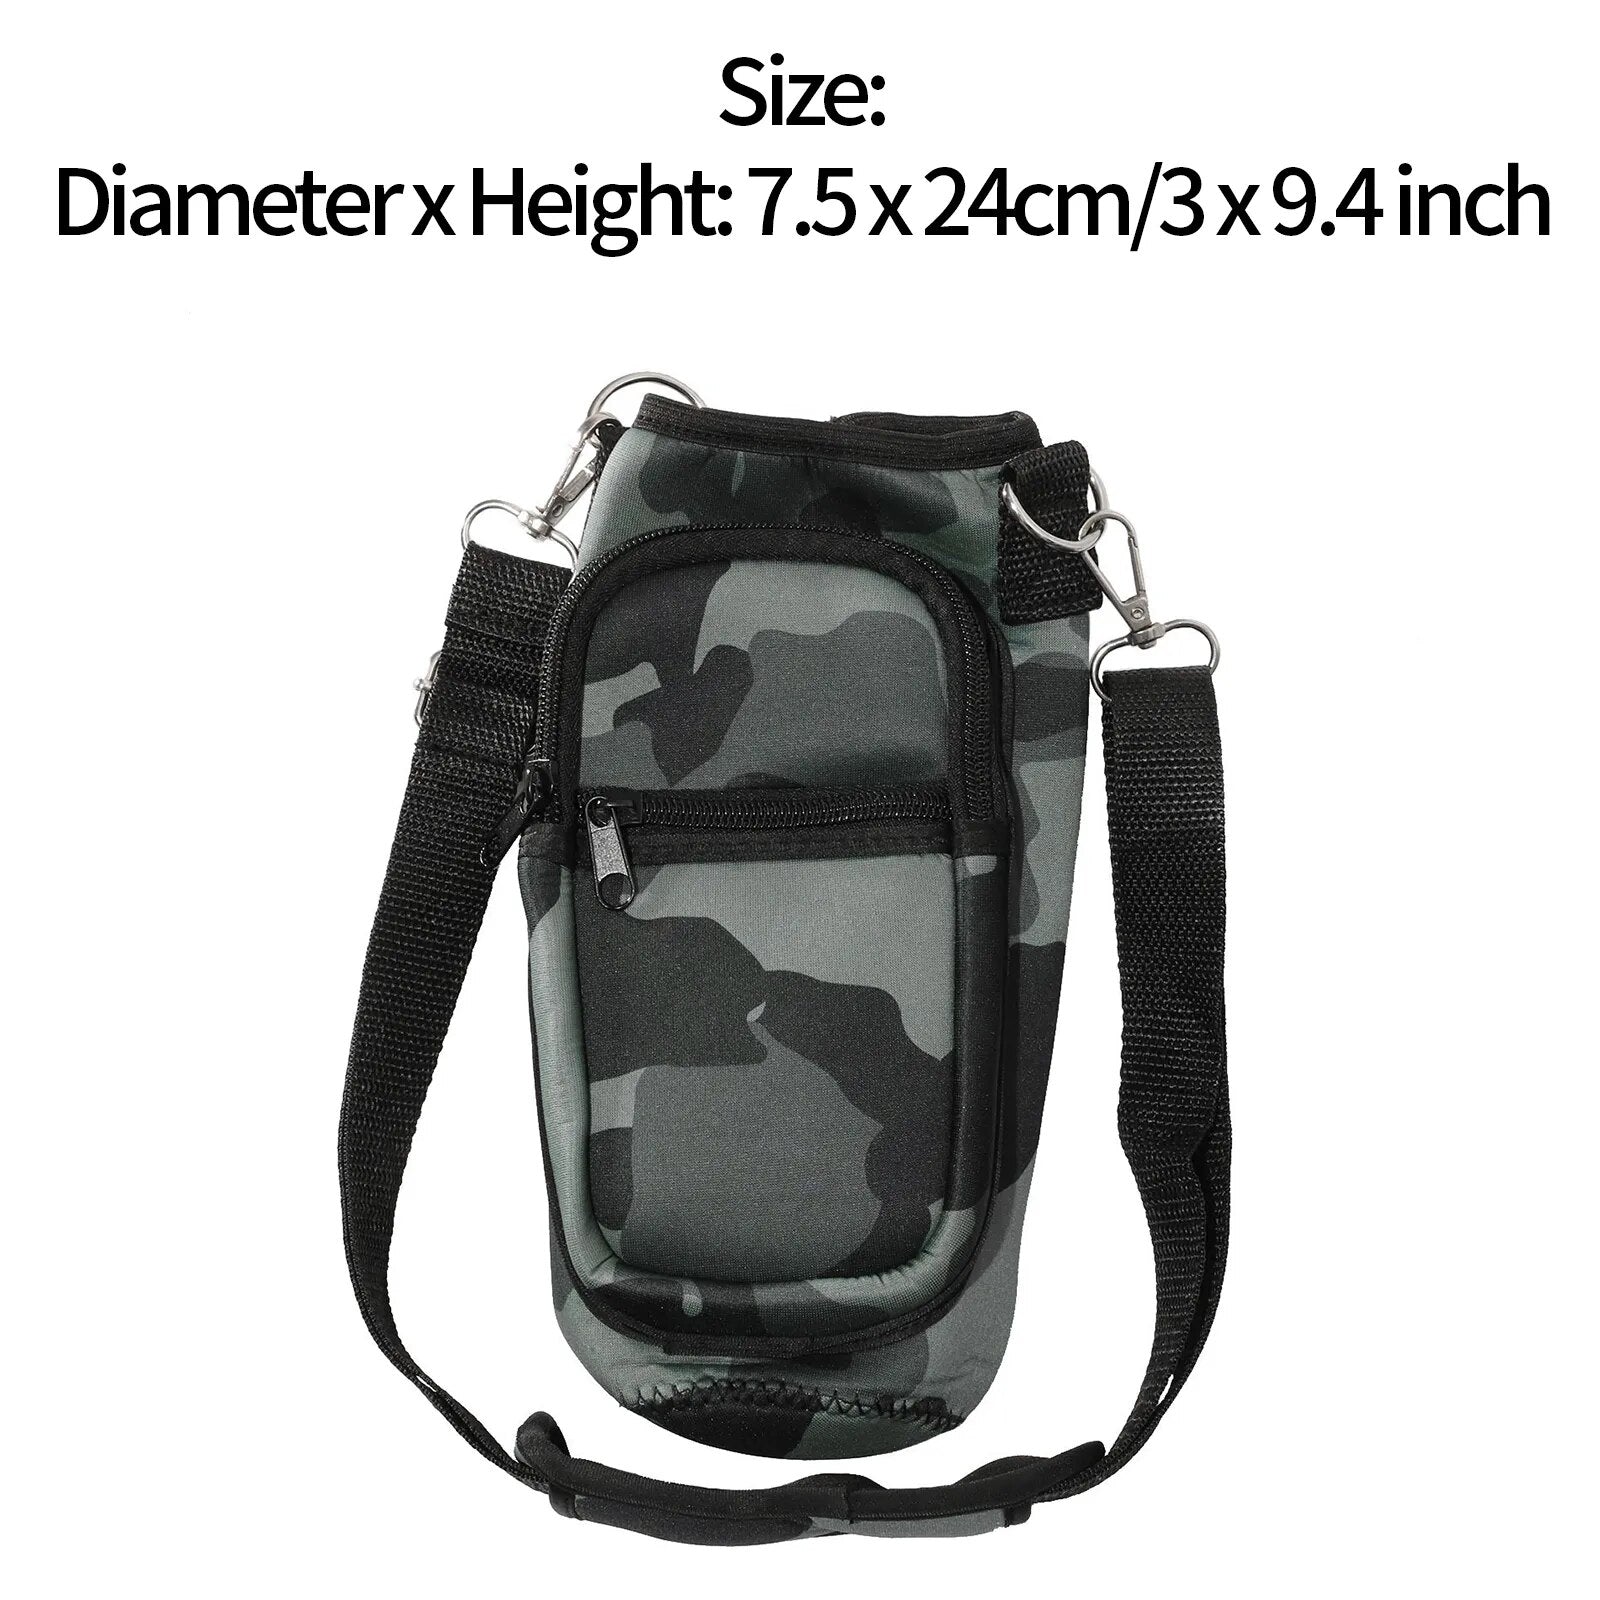 Portable Bottle Bags Insulated Thermal Cooler Warmer Lunch Food Traveling Picnic Insulat Bag Thermoses Bags Outdoor Activities